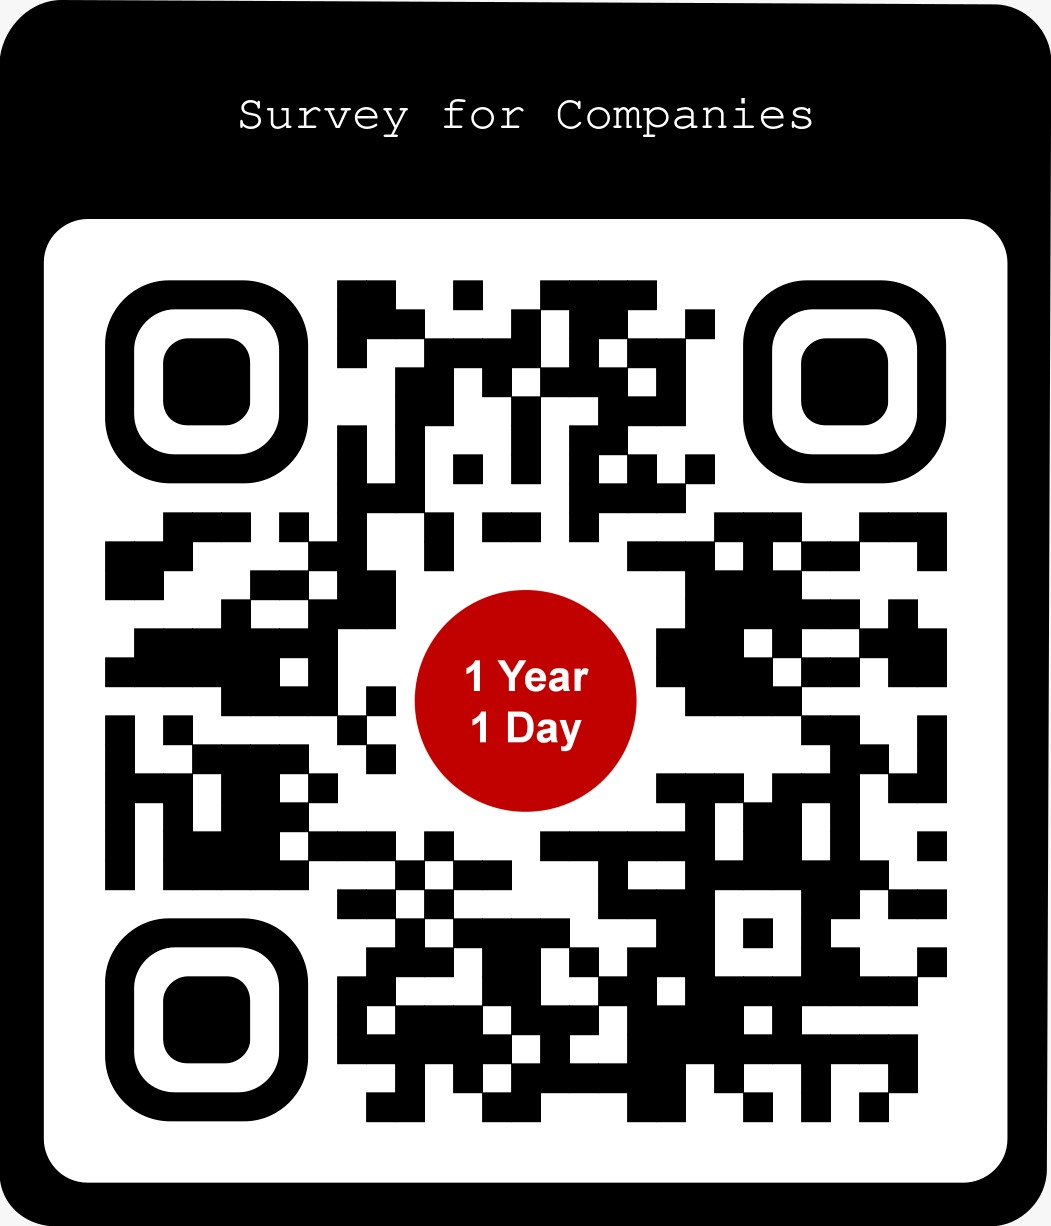 Company Questionnaire